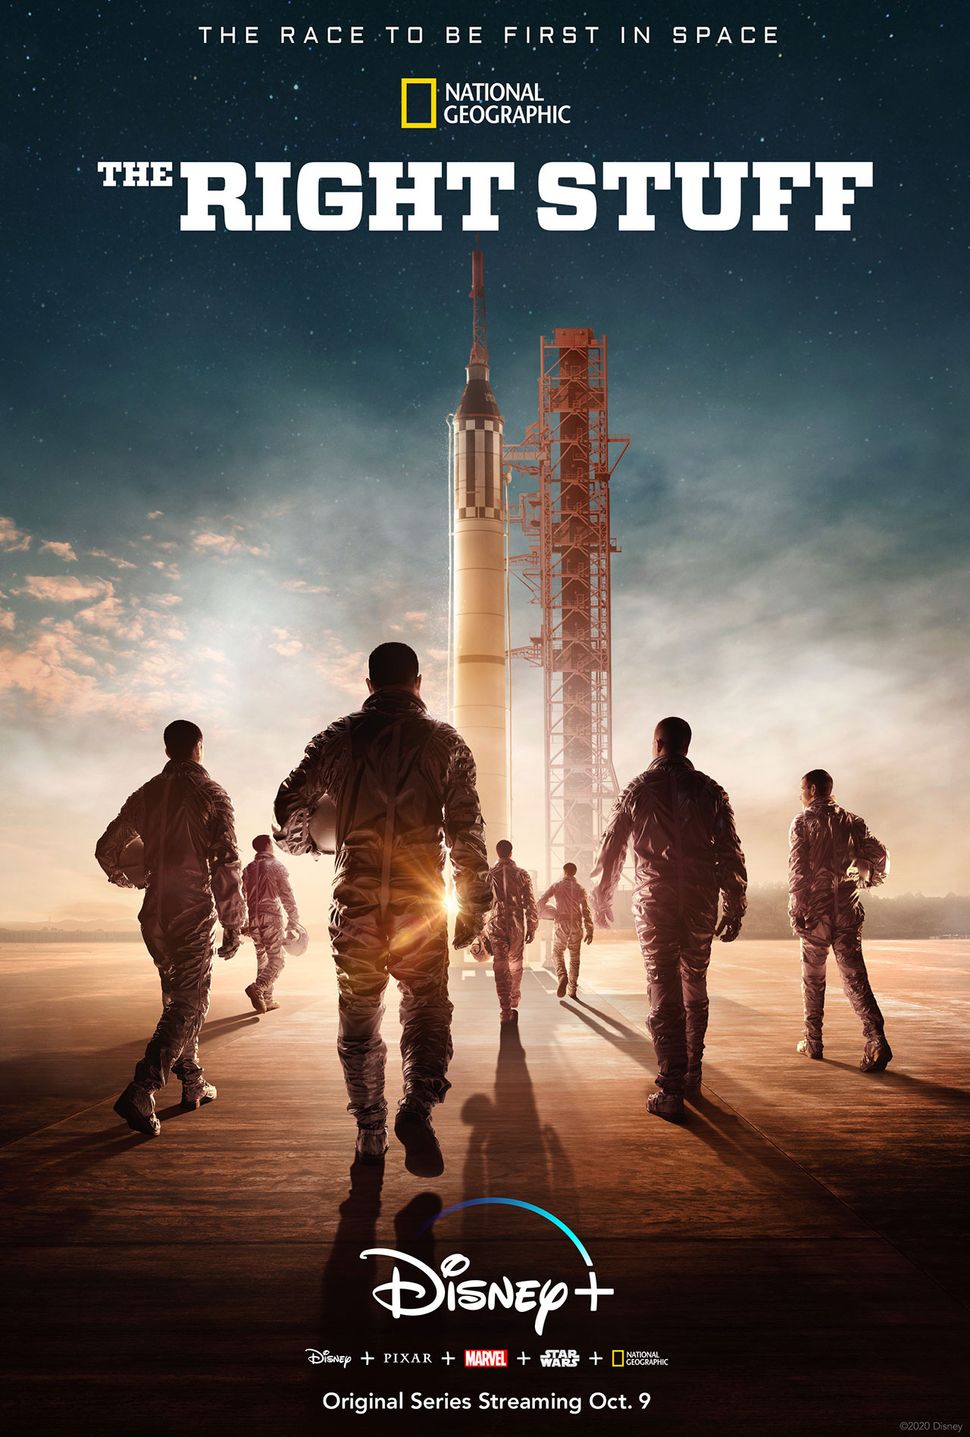 NatGeo sets October launch date for 'The Right Stuff' on Disney Plus